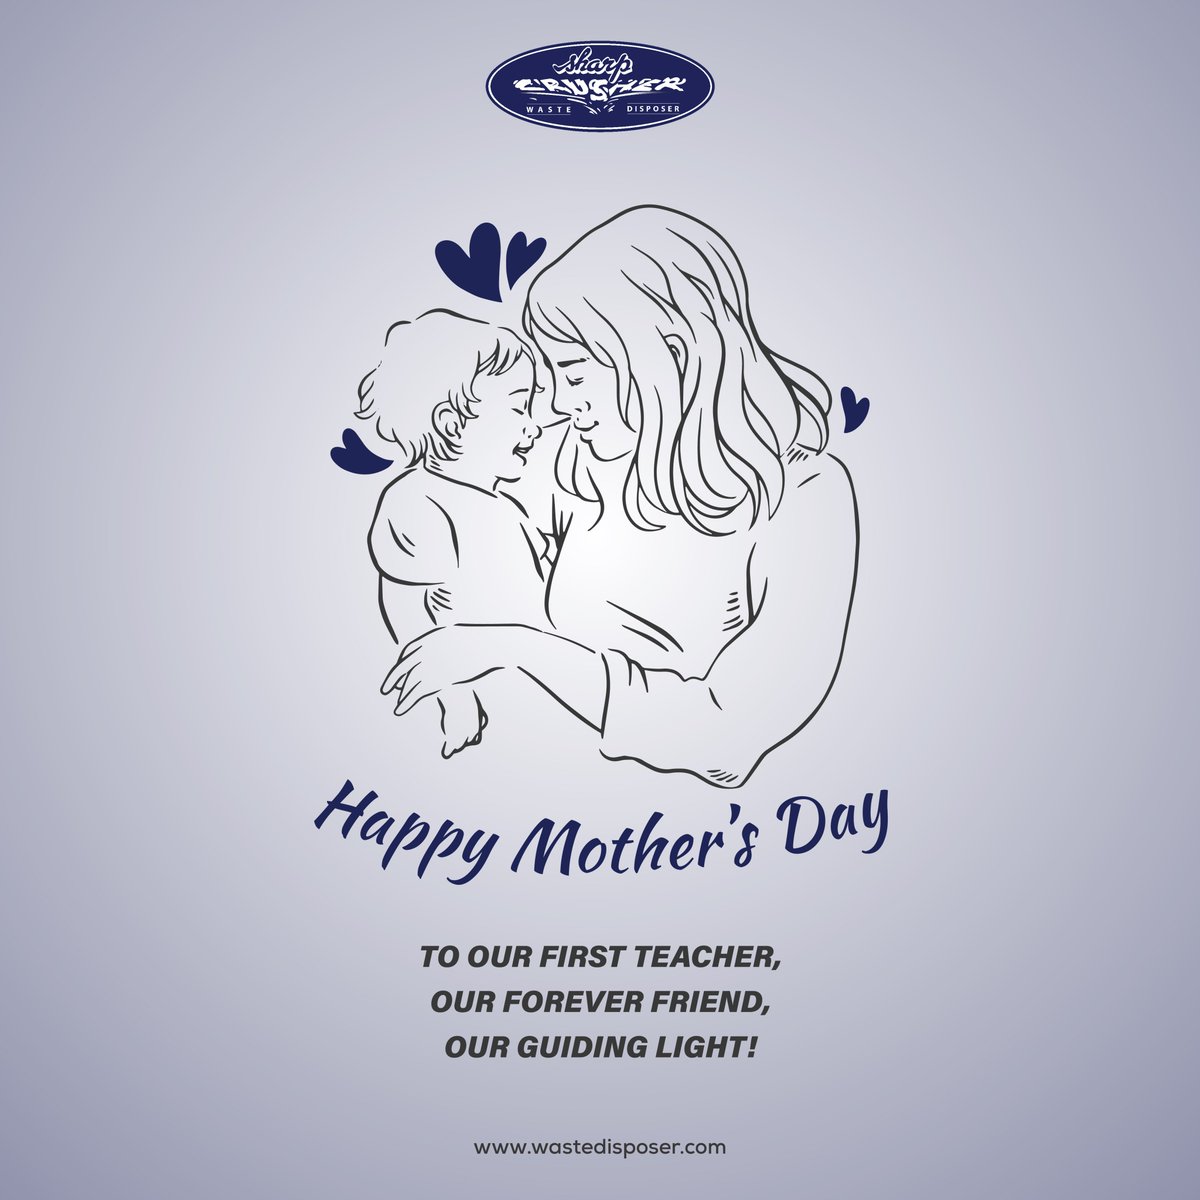 #HappyMothersDay from all of us at #SharpCrusher! 🌸 

Today, we #celebrate the incredible strength, love, and dedication of mothers everywhere. #Thankyou for all that you do.

#WasteDisposer #happymothersday2024 #HappyMothersDayMom #motherhood #mother #mothersday #Mothersday2024